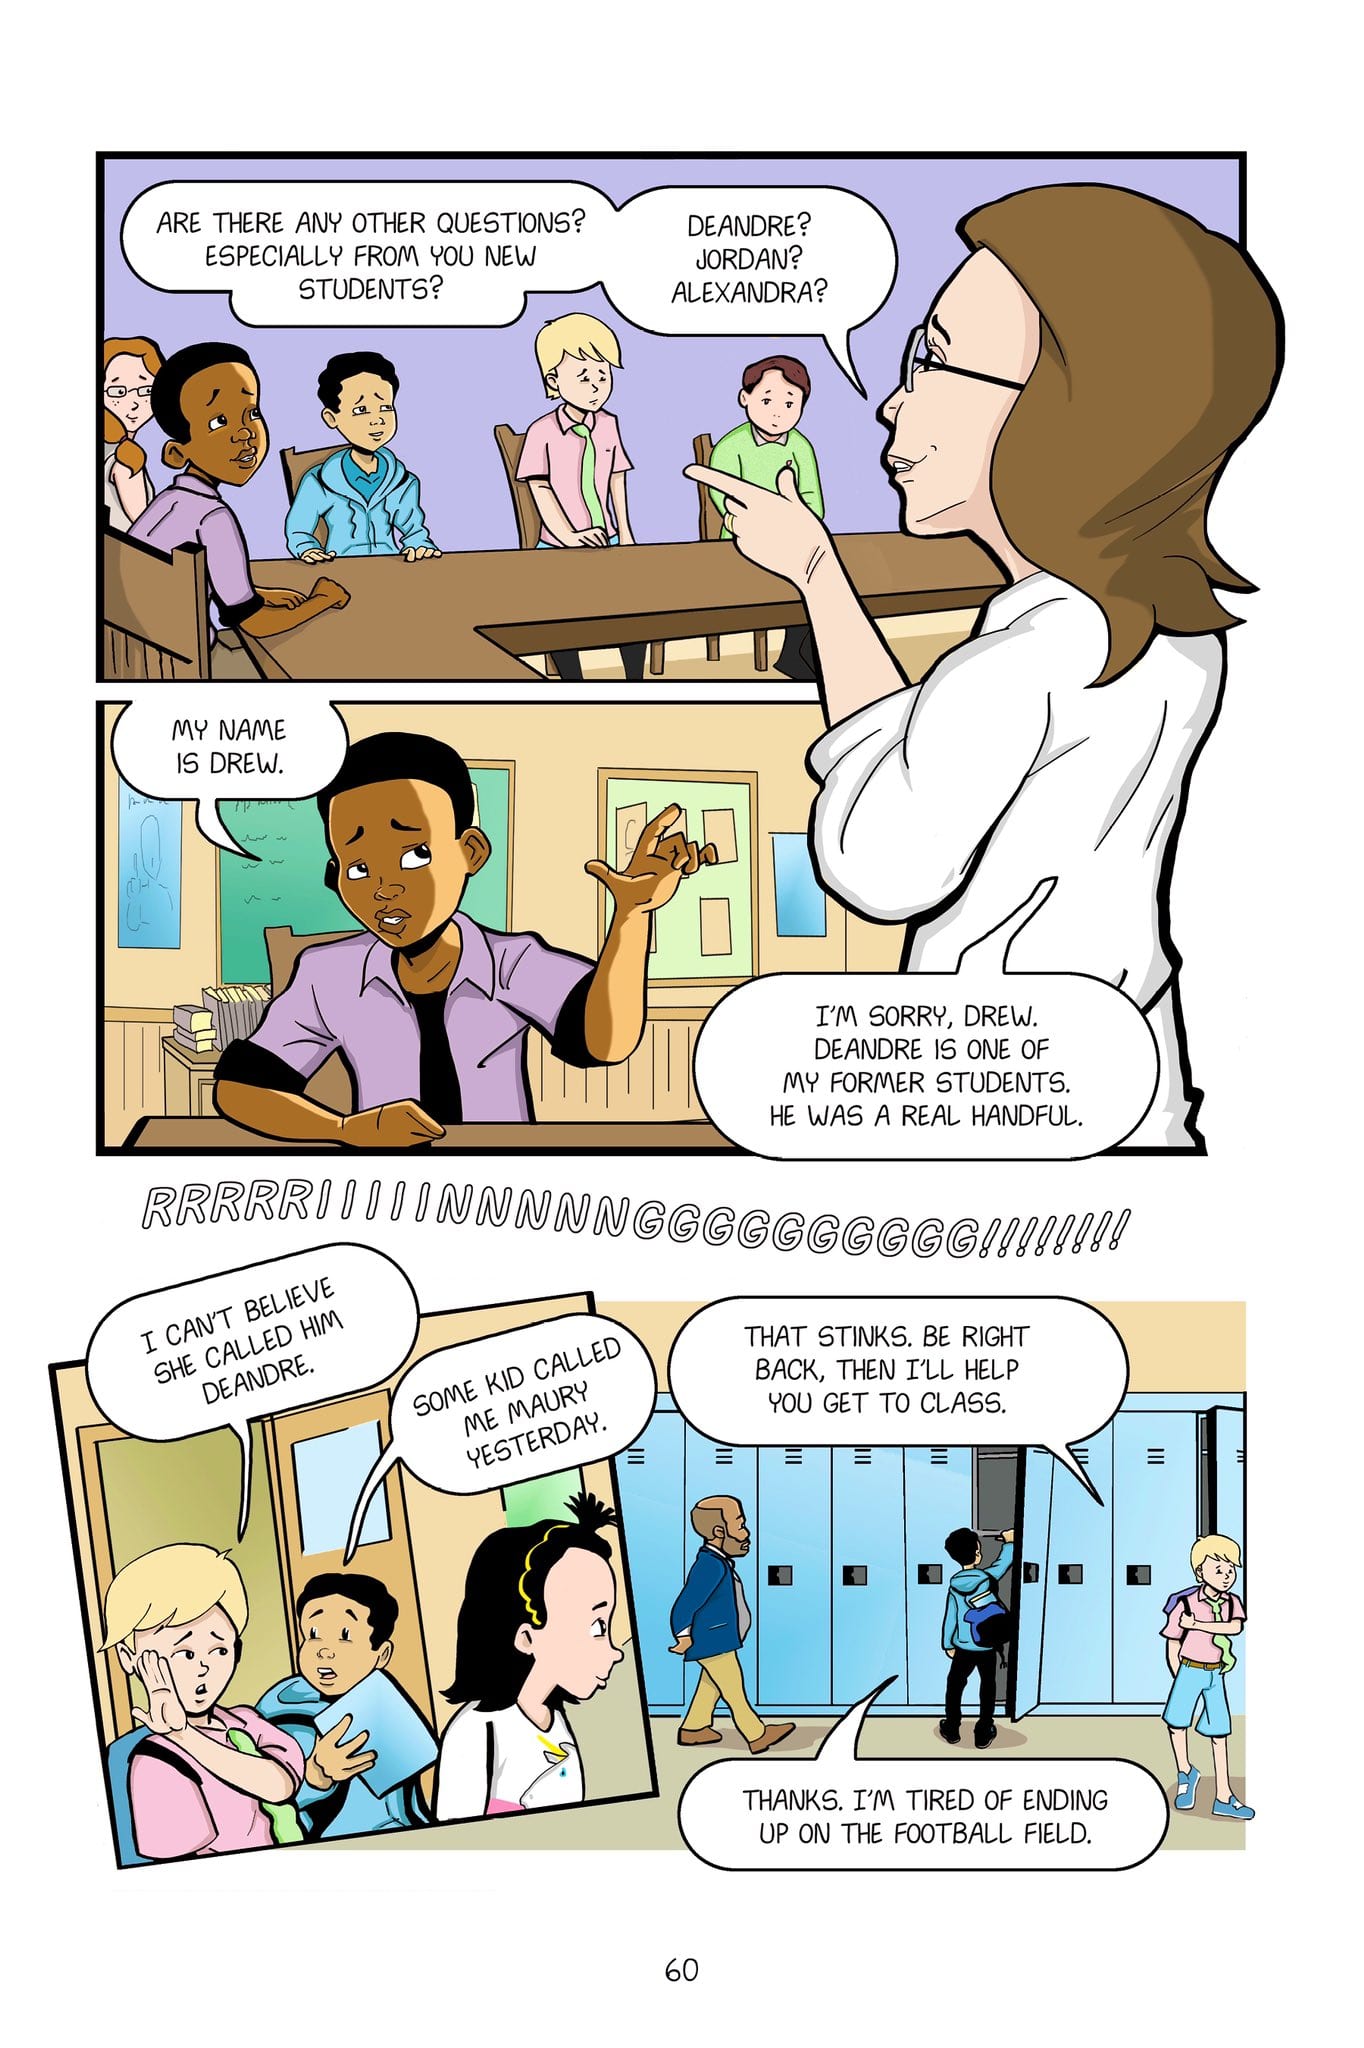 A cartoon of an educator talking to students with the caption: "Are there any other questions? Especially from you new students? Deandre? Jordan? Alexandra?" The student of color raises their hand and responds "My name is Drew." The educator replies "I'm sorry Drew. Deandre is one of my former students. He was a real handful" 